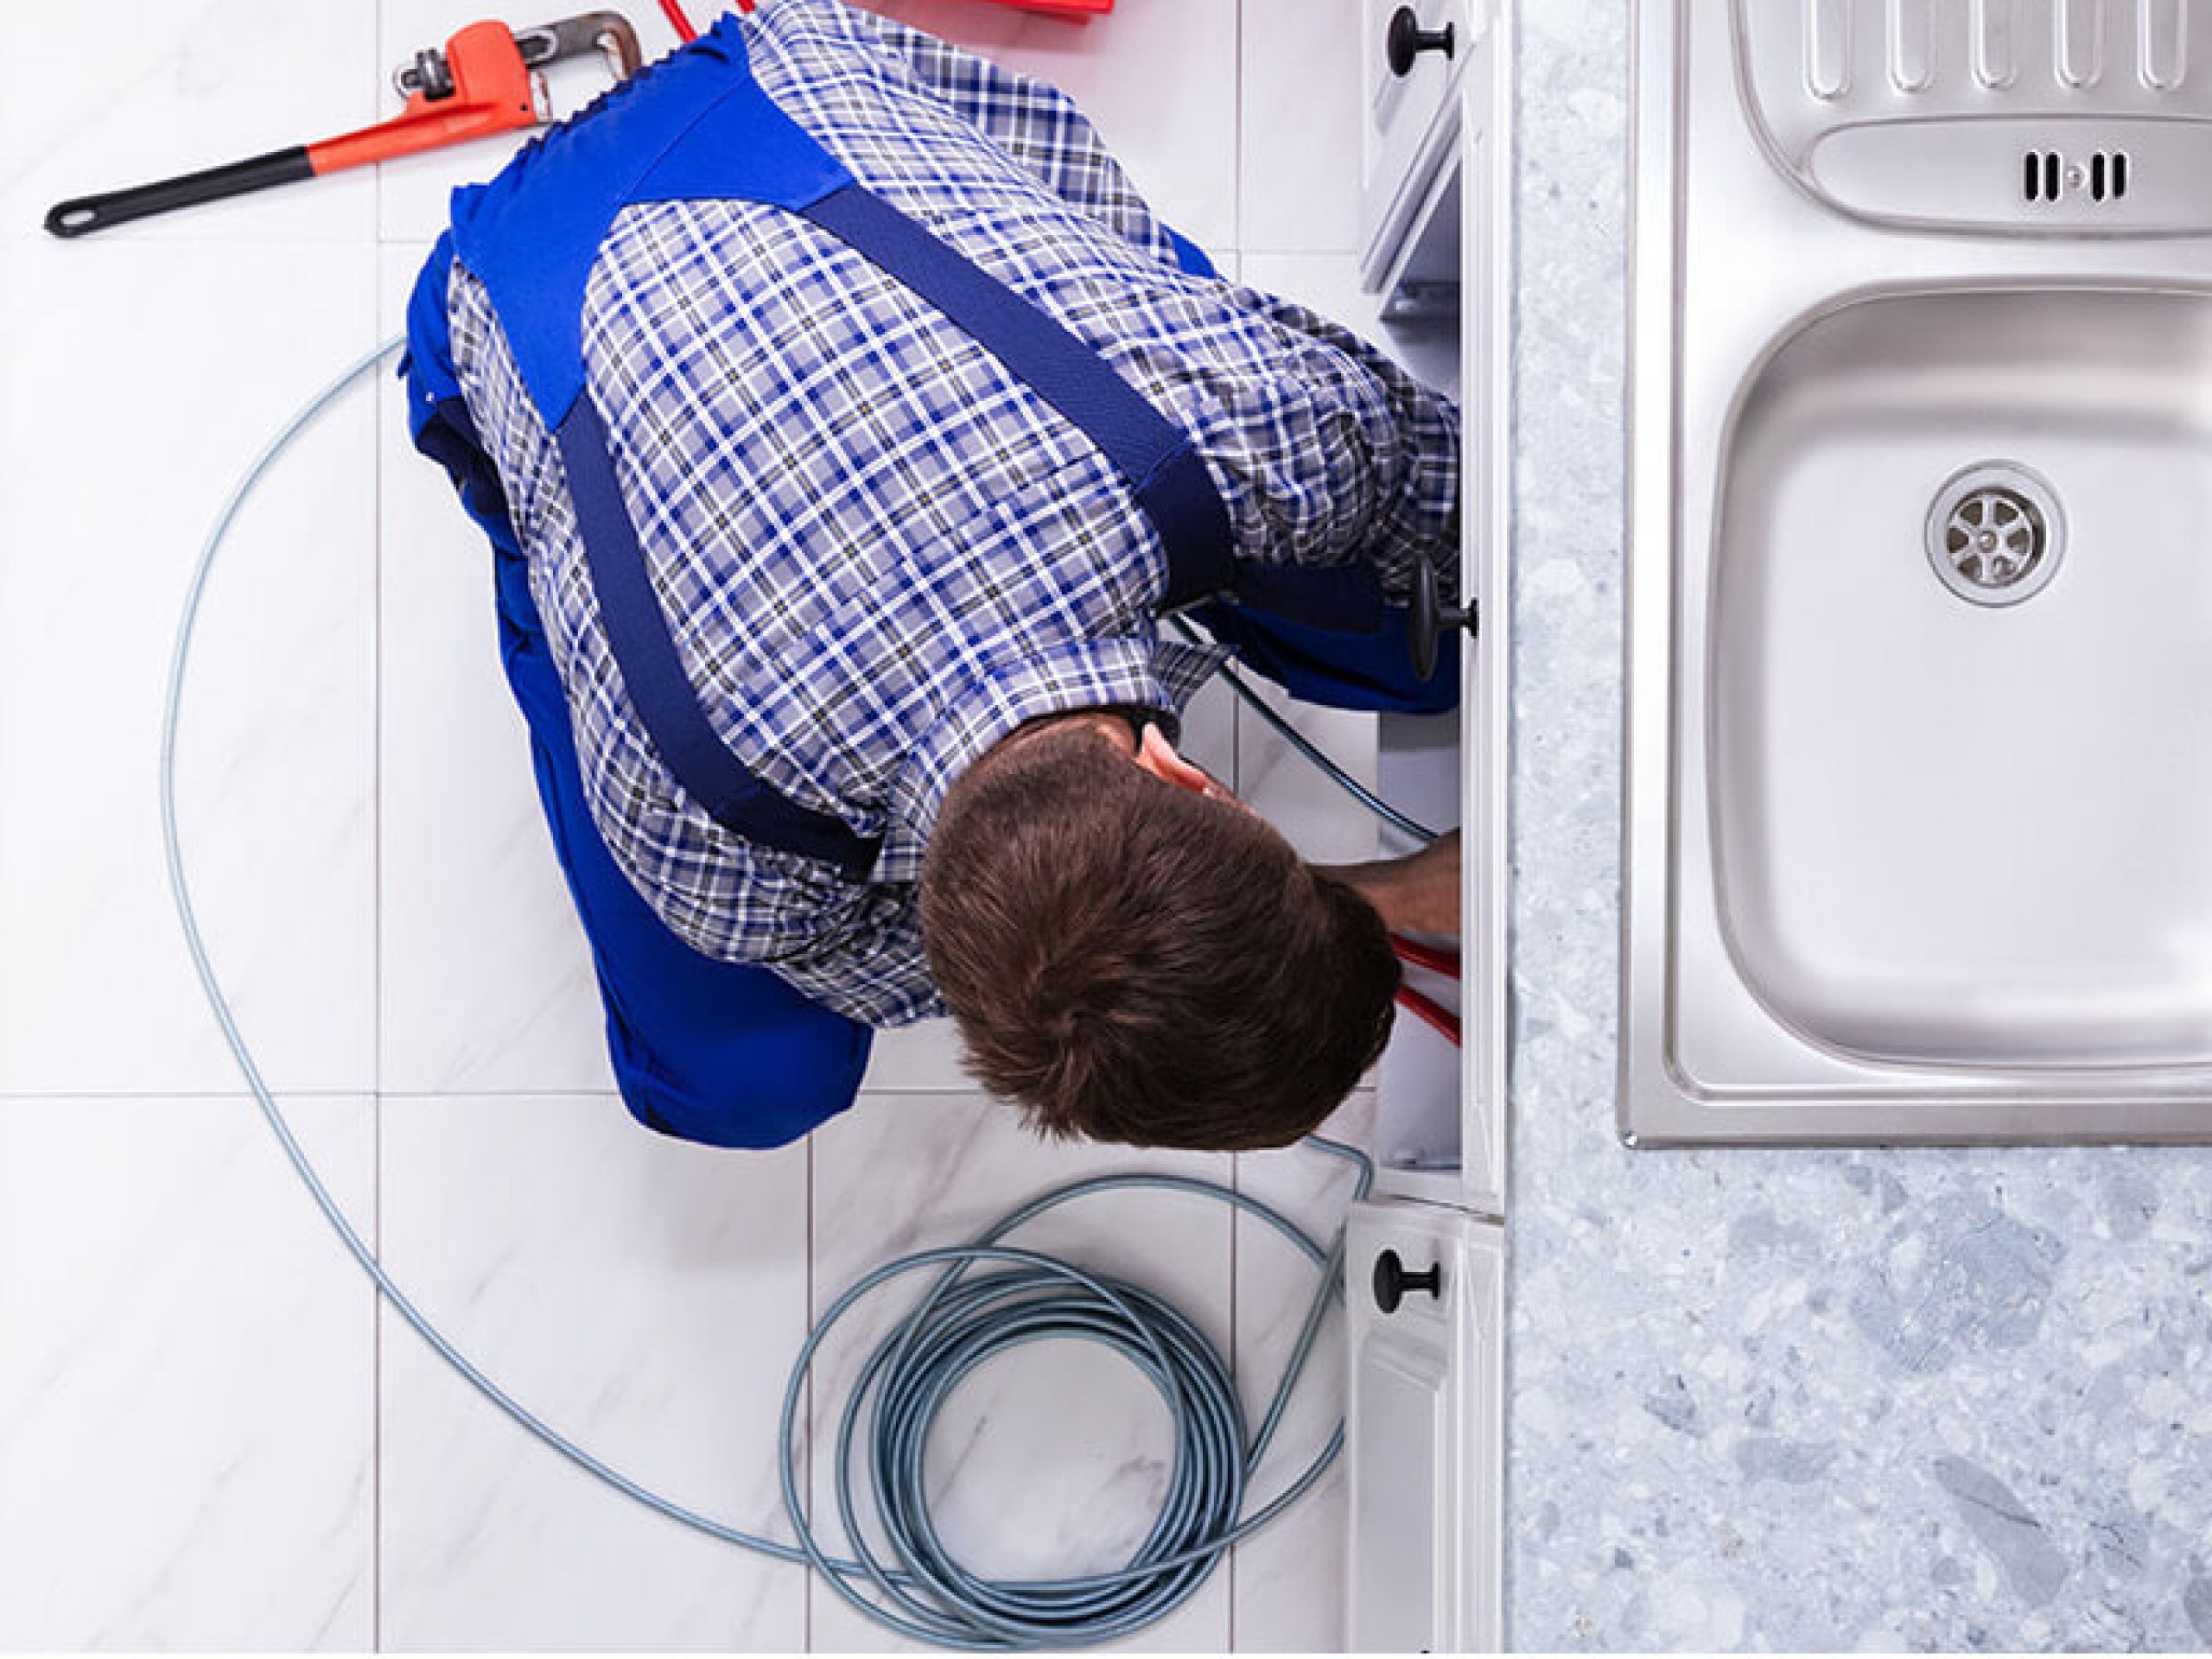 Plumber fixing pipe John G. Plumbing Drain and Sewer Cleaning